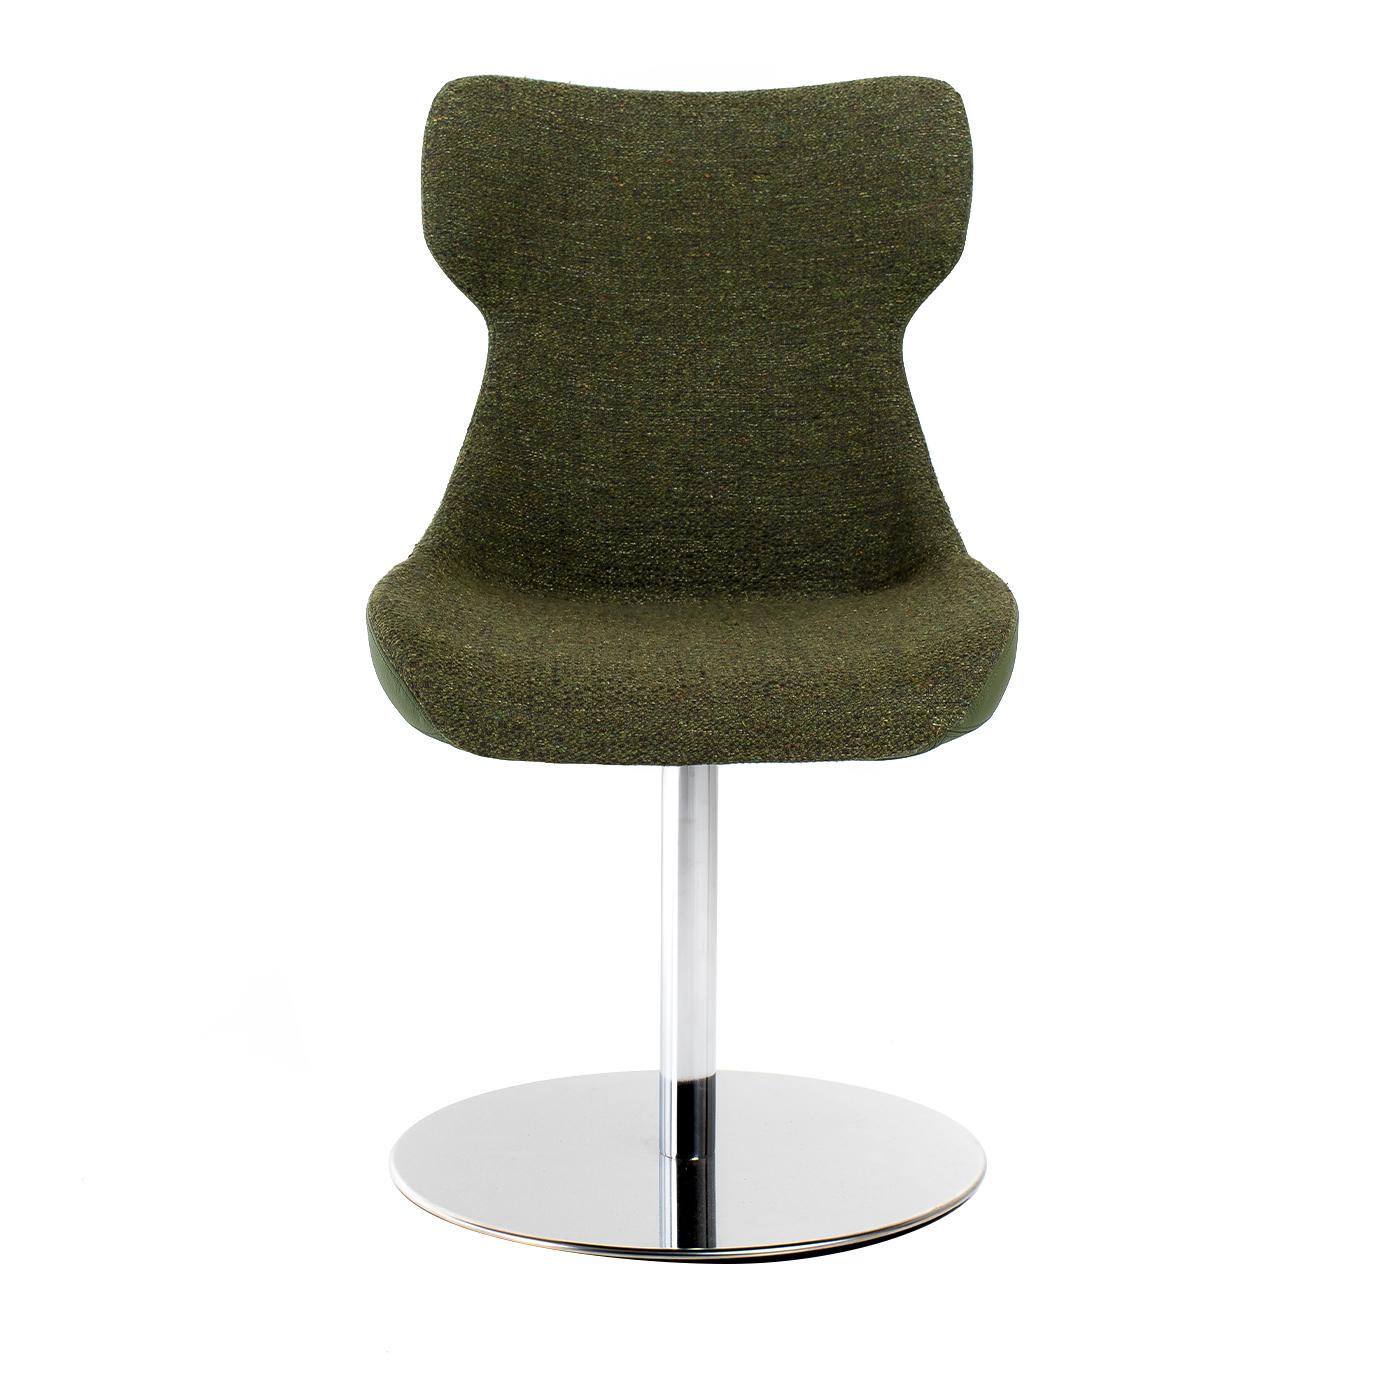 The refined design of the Camila chair makes it a perfect complement to any home or office decor. This unique piece of furniture is characterized by the juxtaposition of leather and fabric, both in a matte olive-green nuance. A silver-lacquered